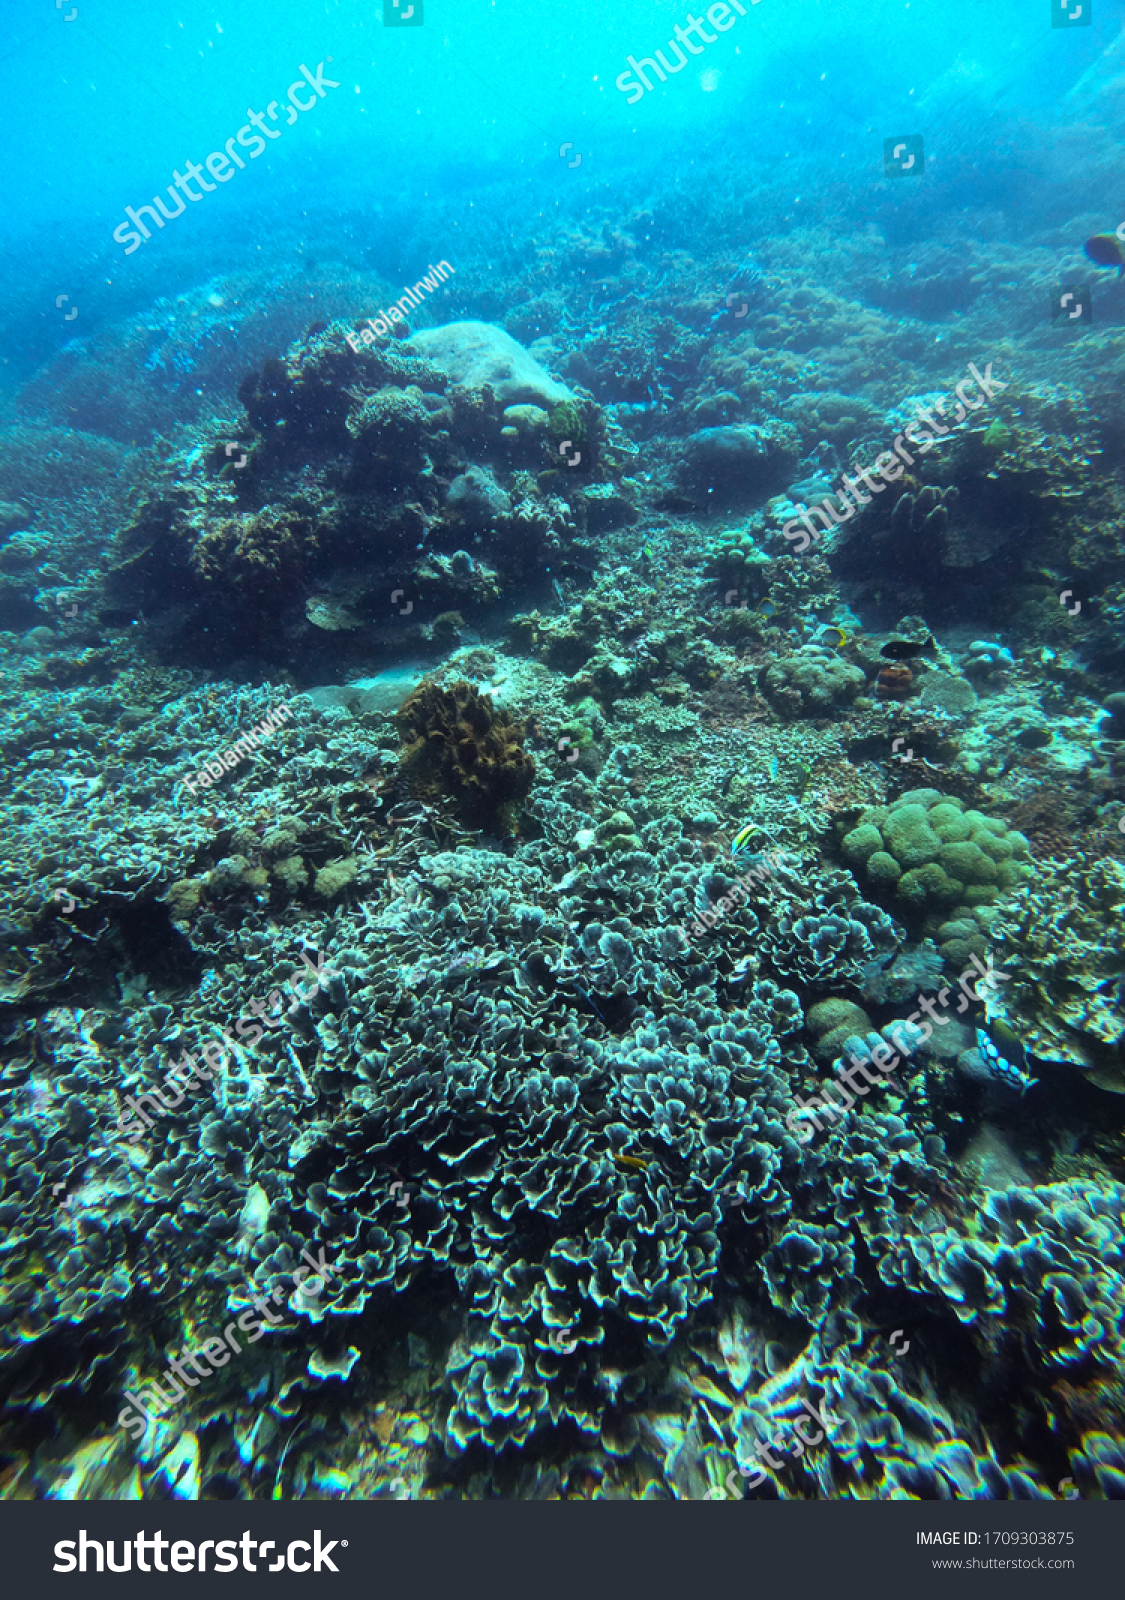 Diving on stunning healthy coral reefs in Bali, Indonesia #1709303875